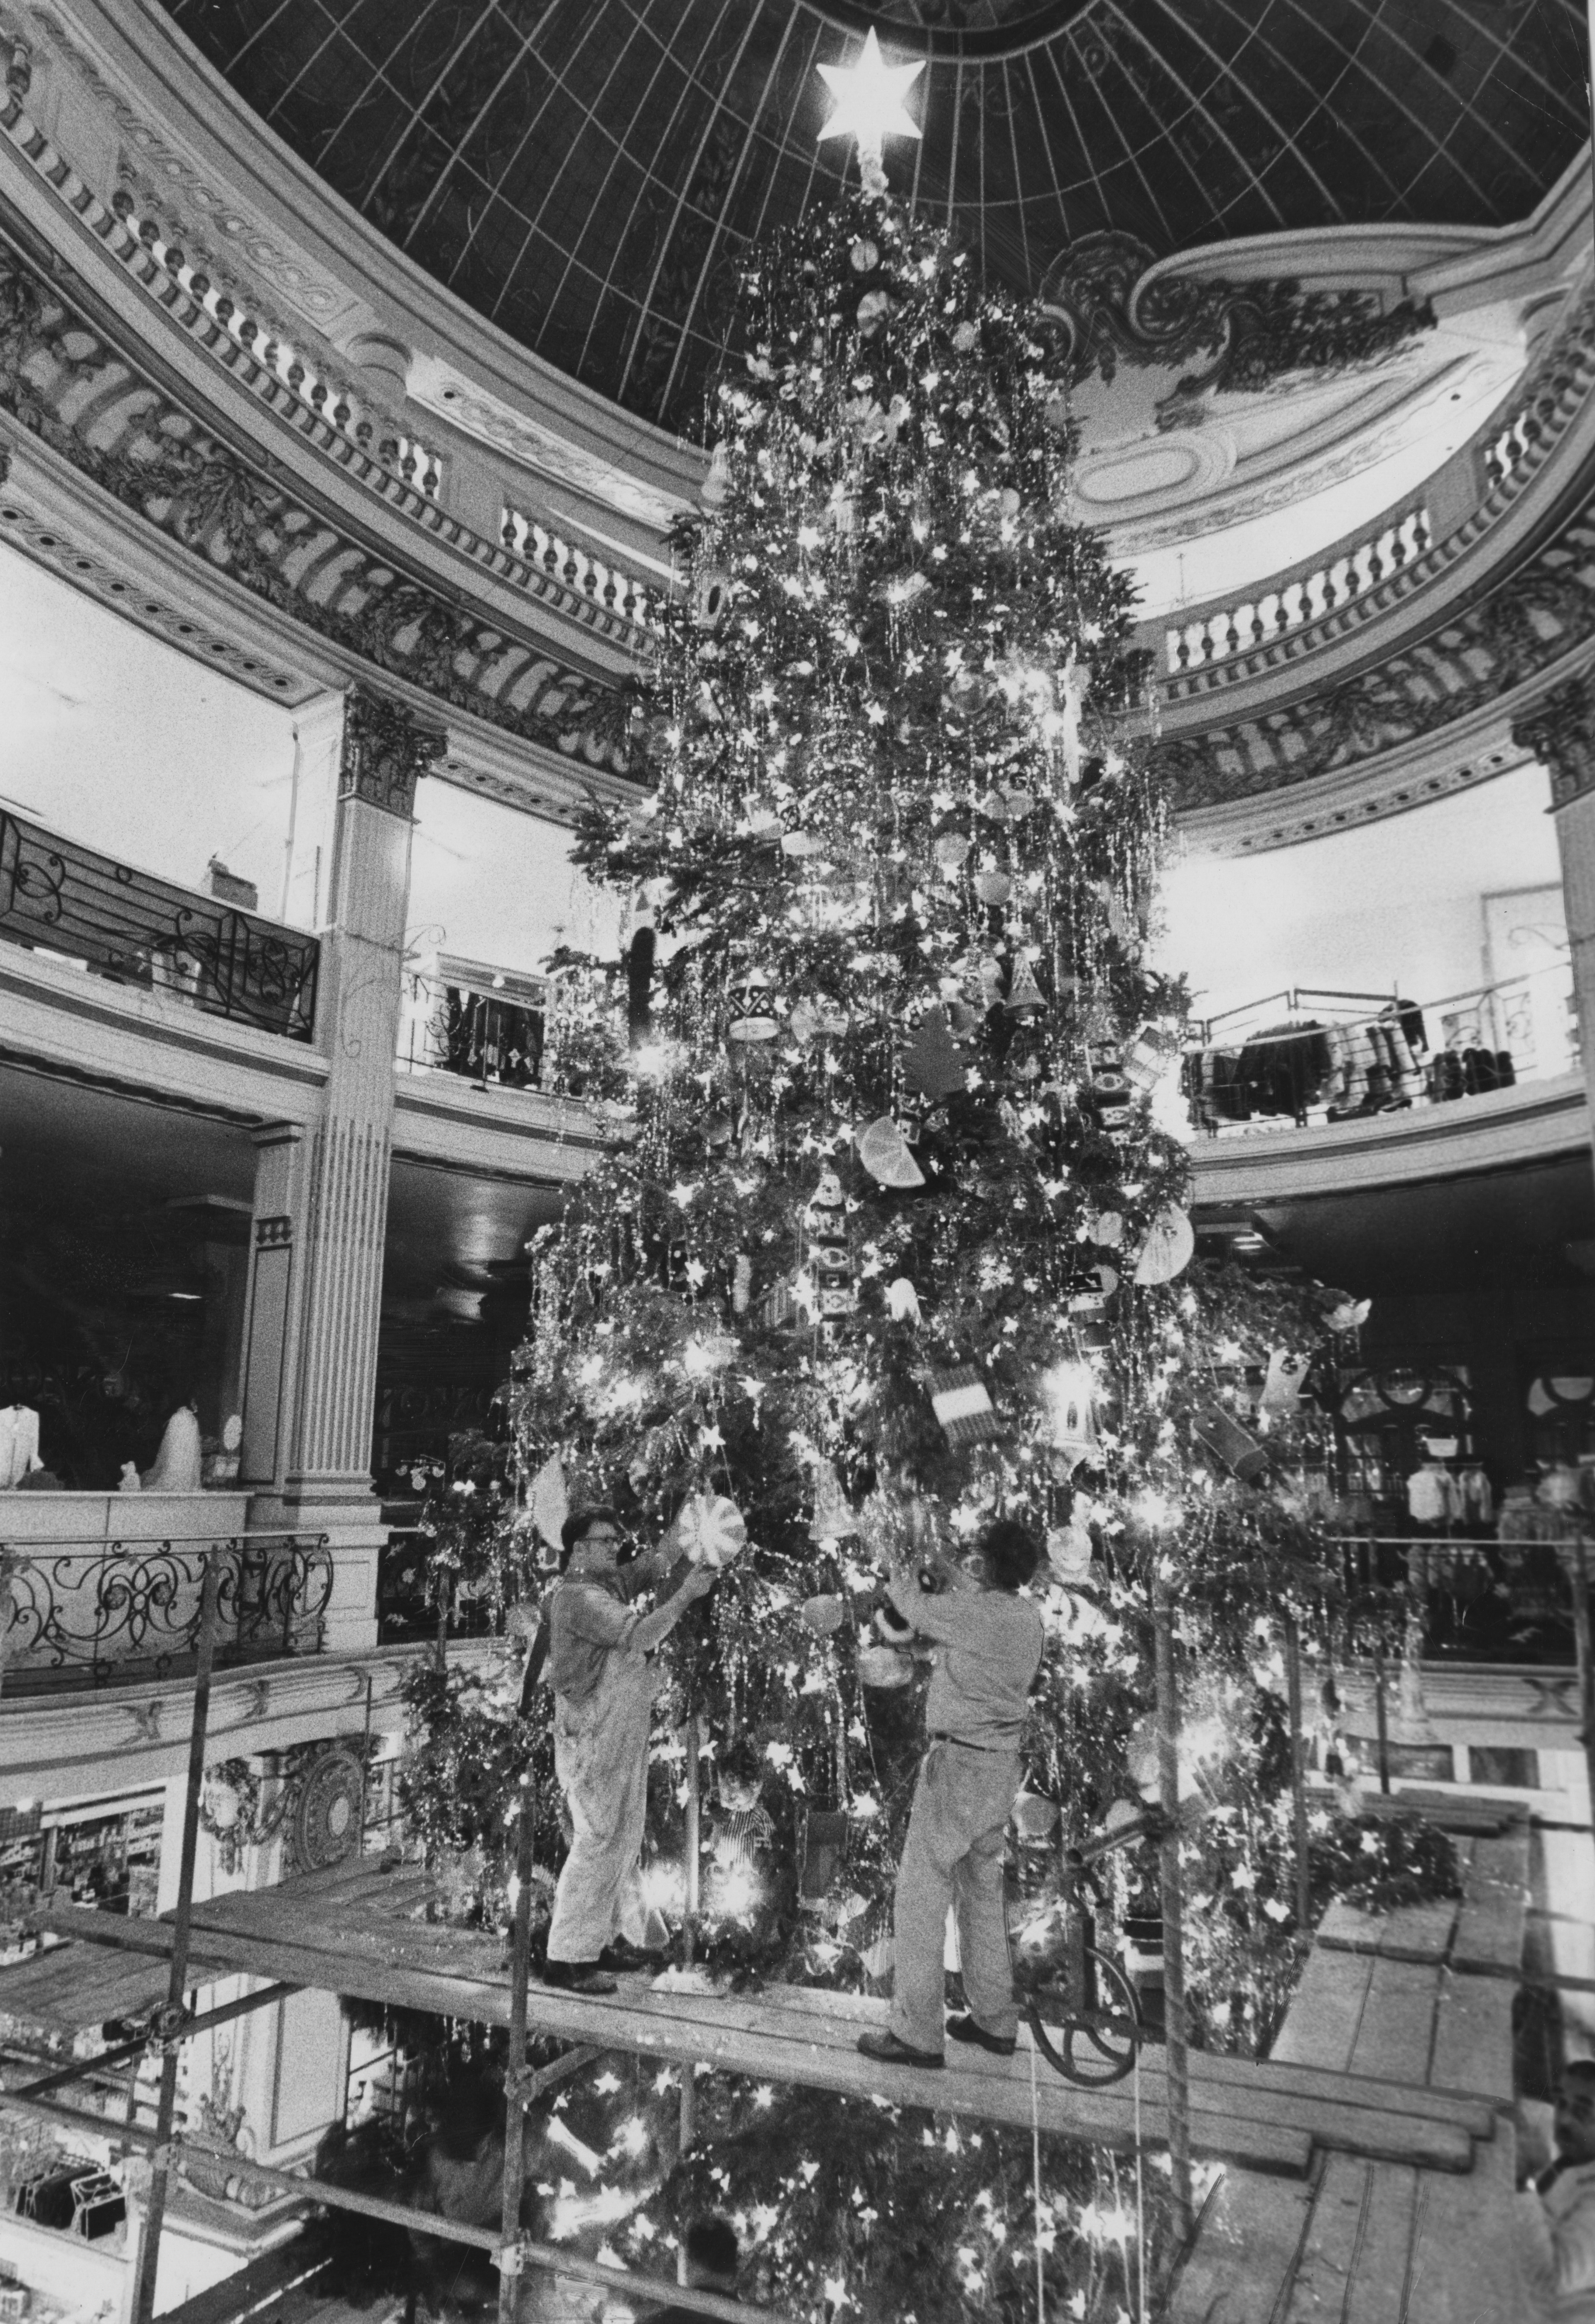 Two workers in front of a tall Christmas tree.